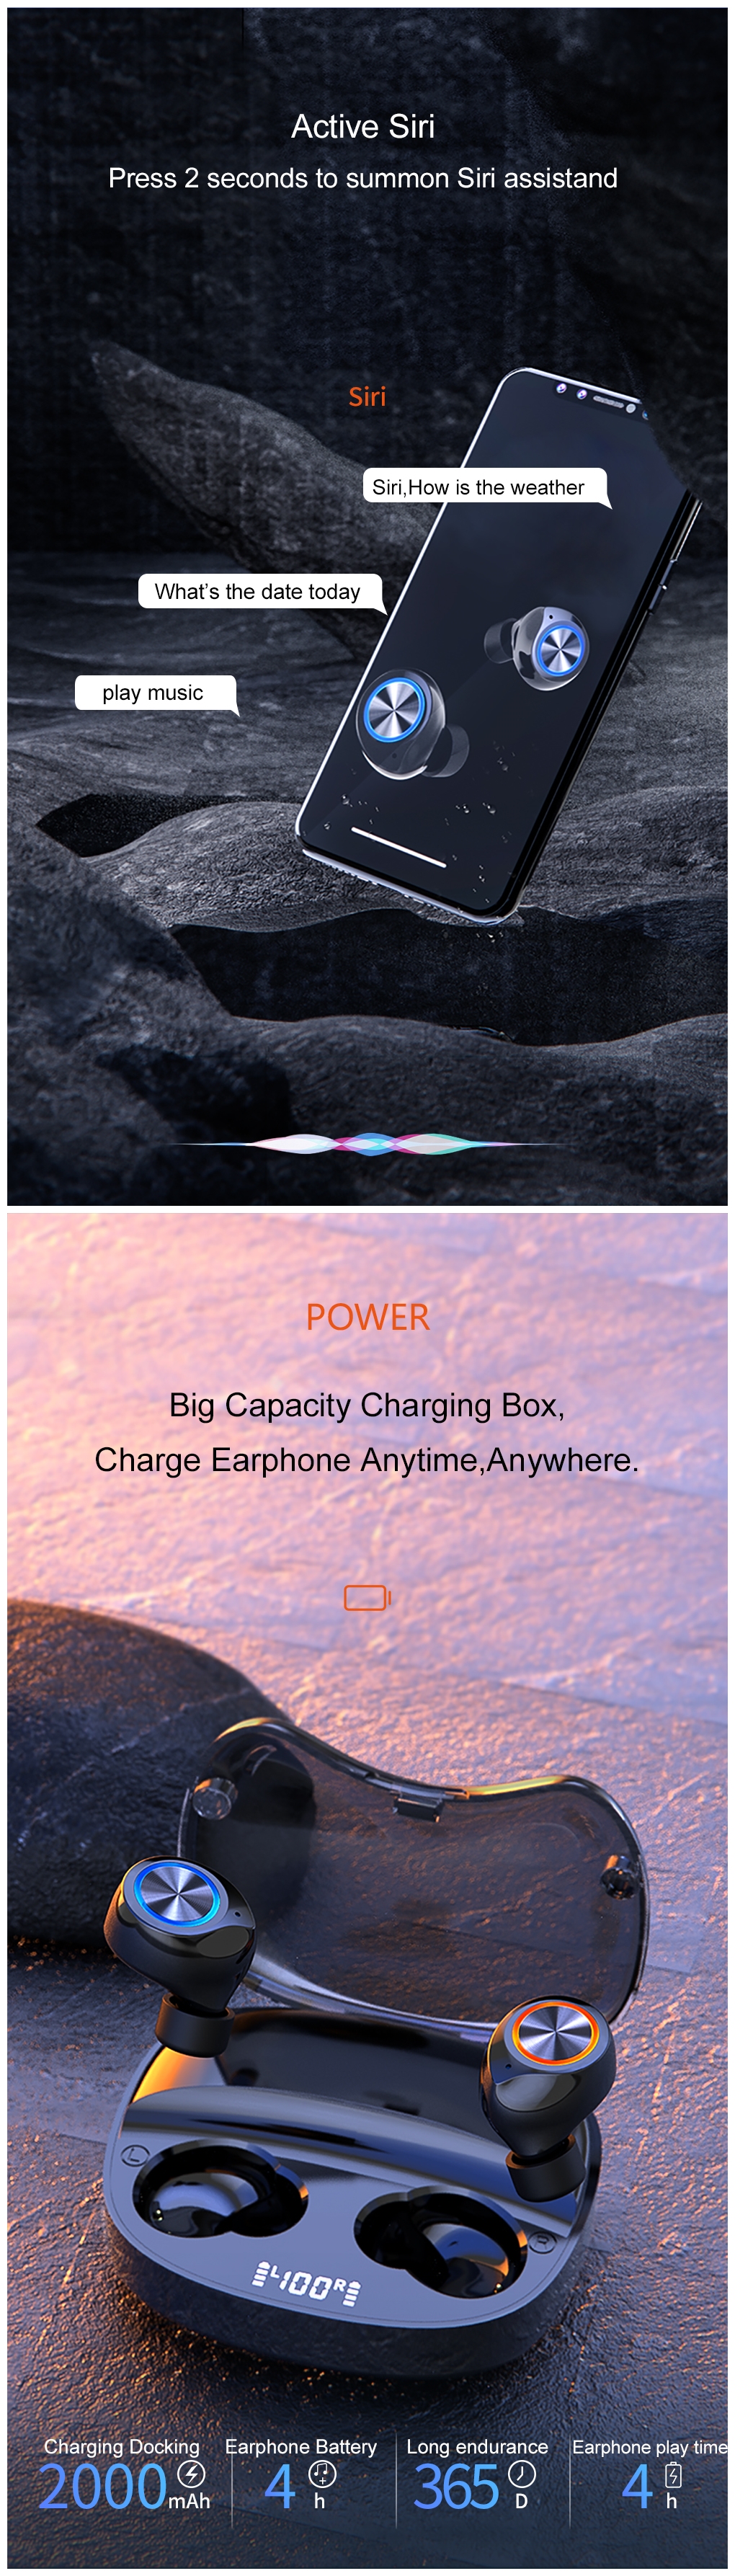 Wireless Earbuds With Power Bank 11